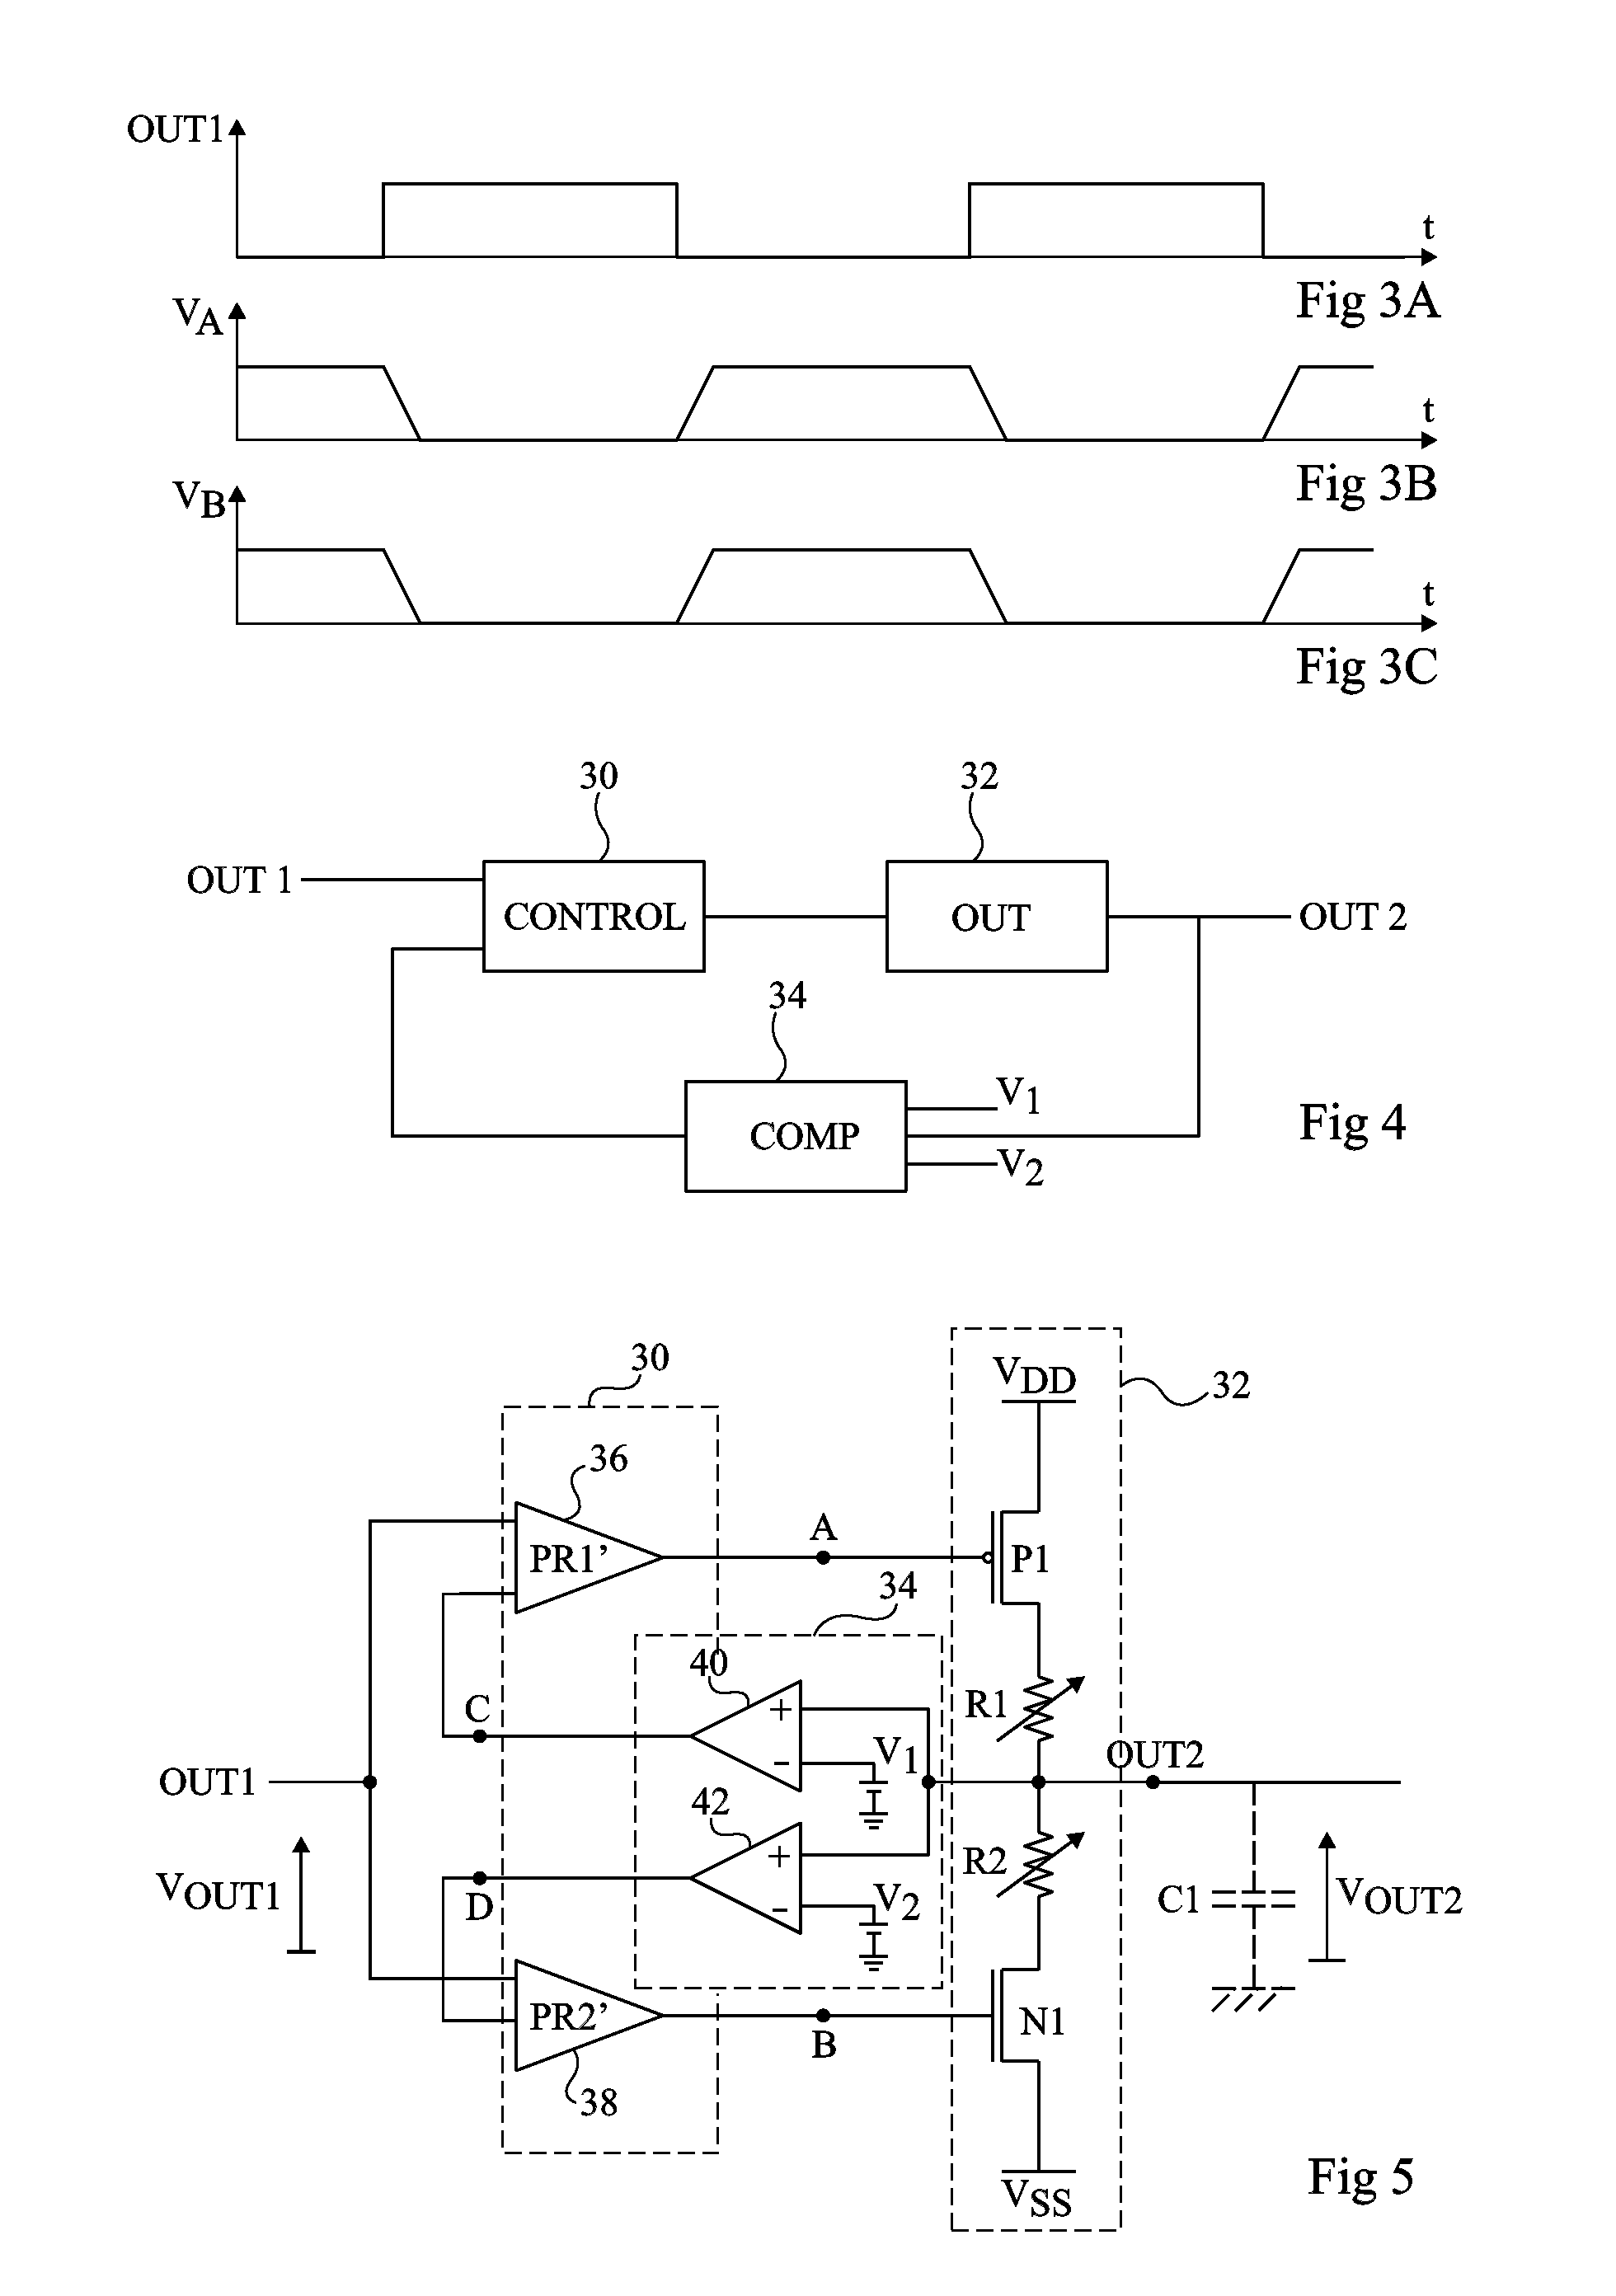 Buffer Circuit for a Capacitive Load of High Value